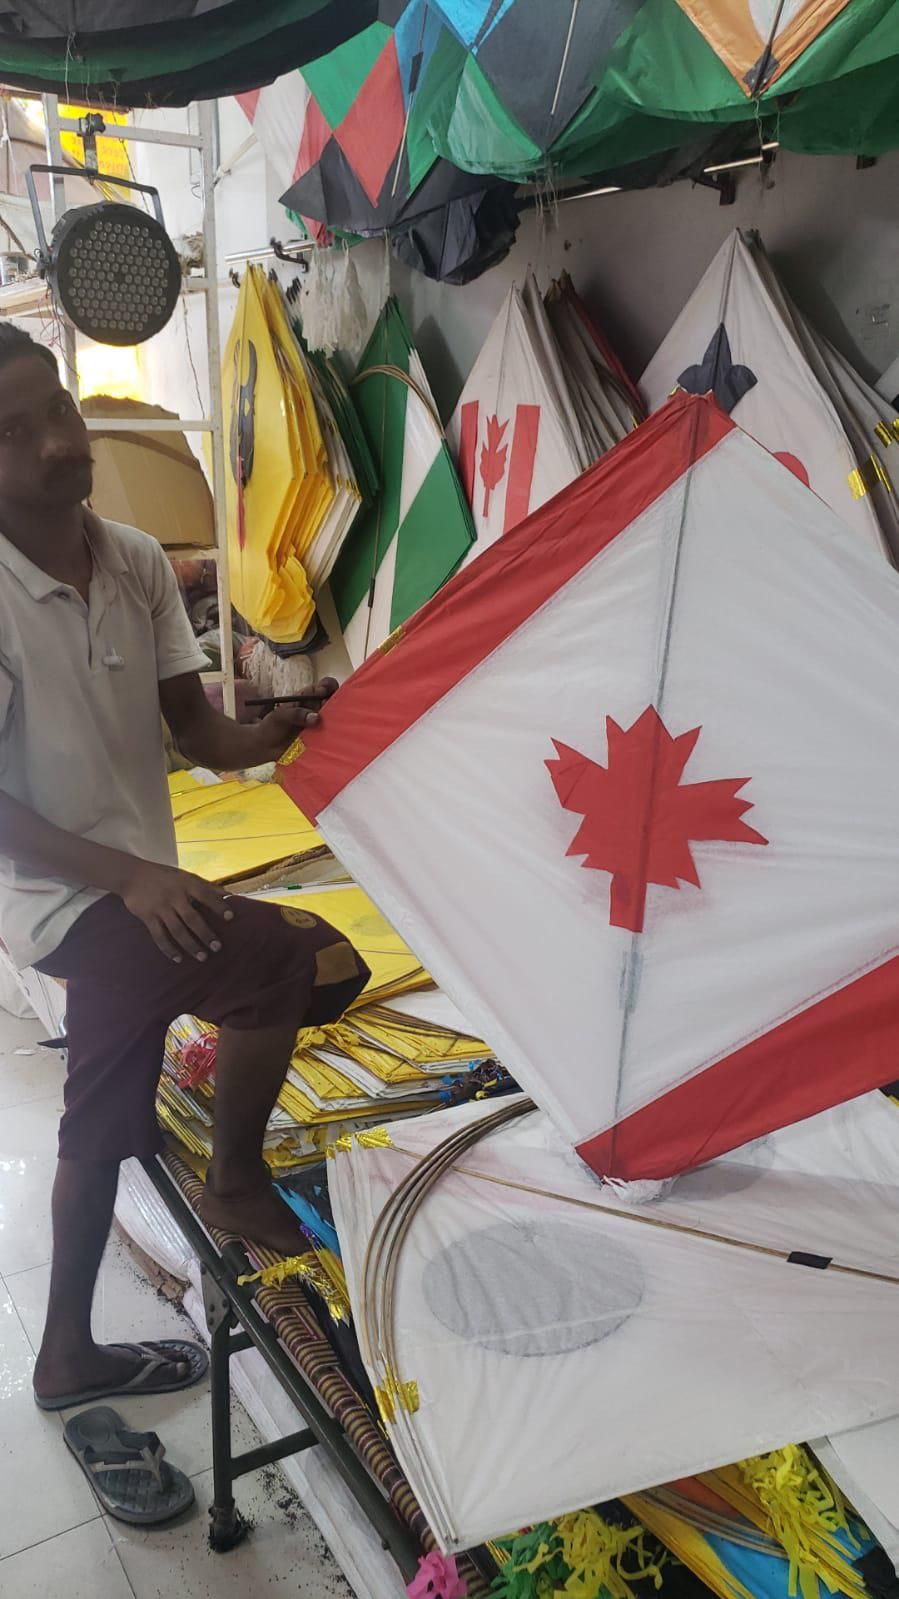 Canadian flag according to kite makers in India.